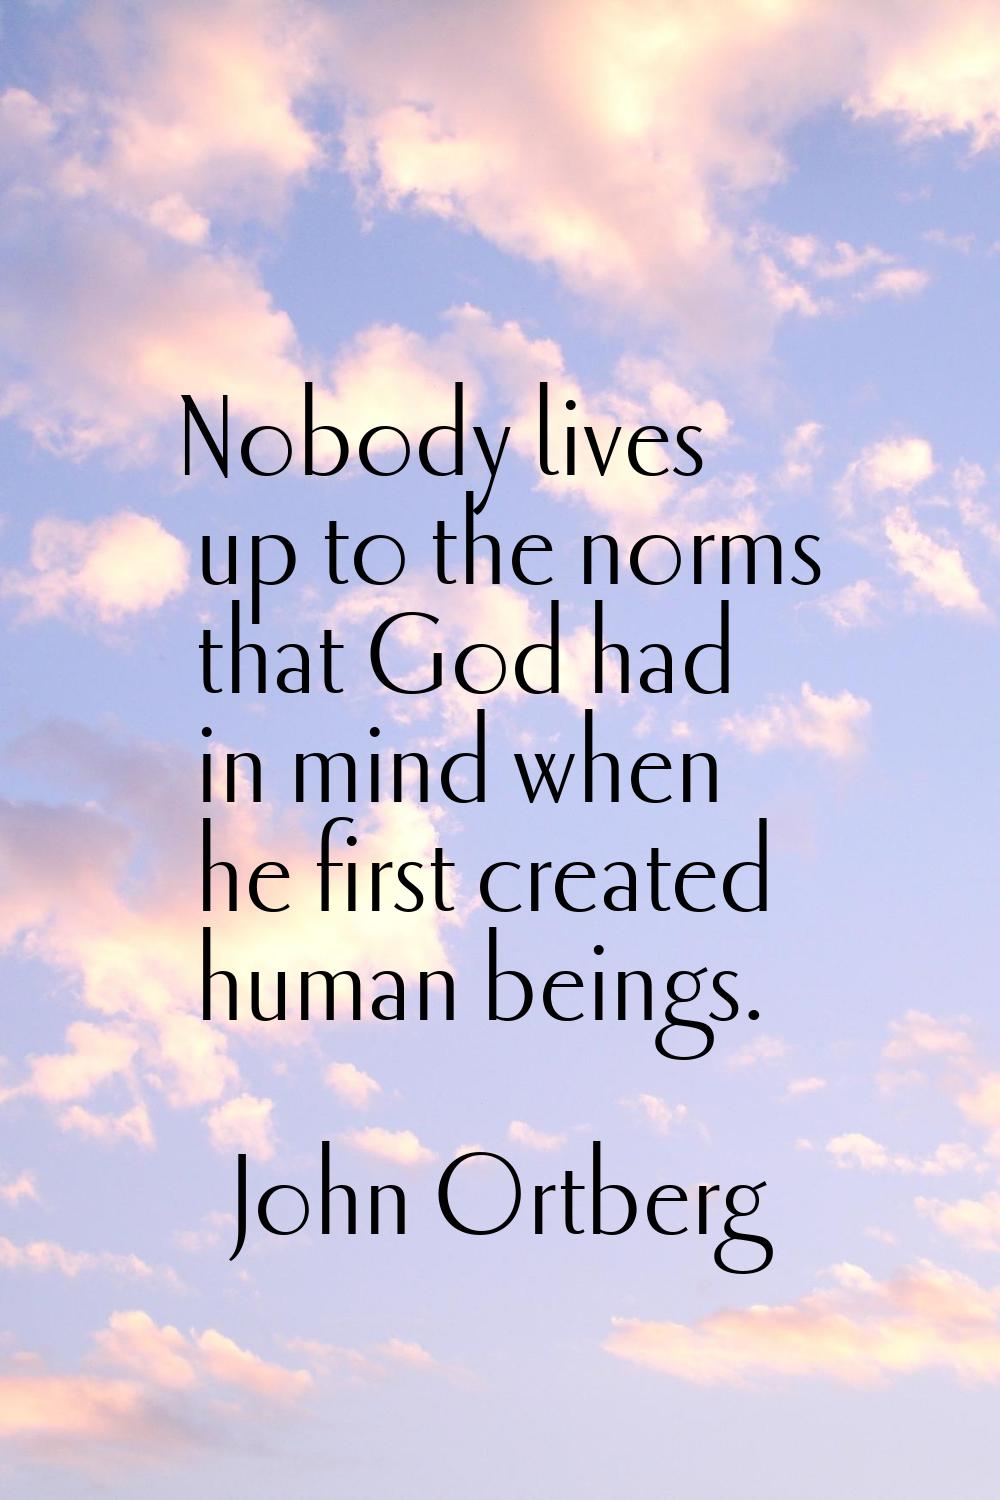 Nobody lives up to the norms that God had in mind when he first created human beings.